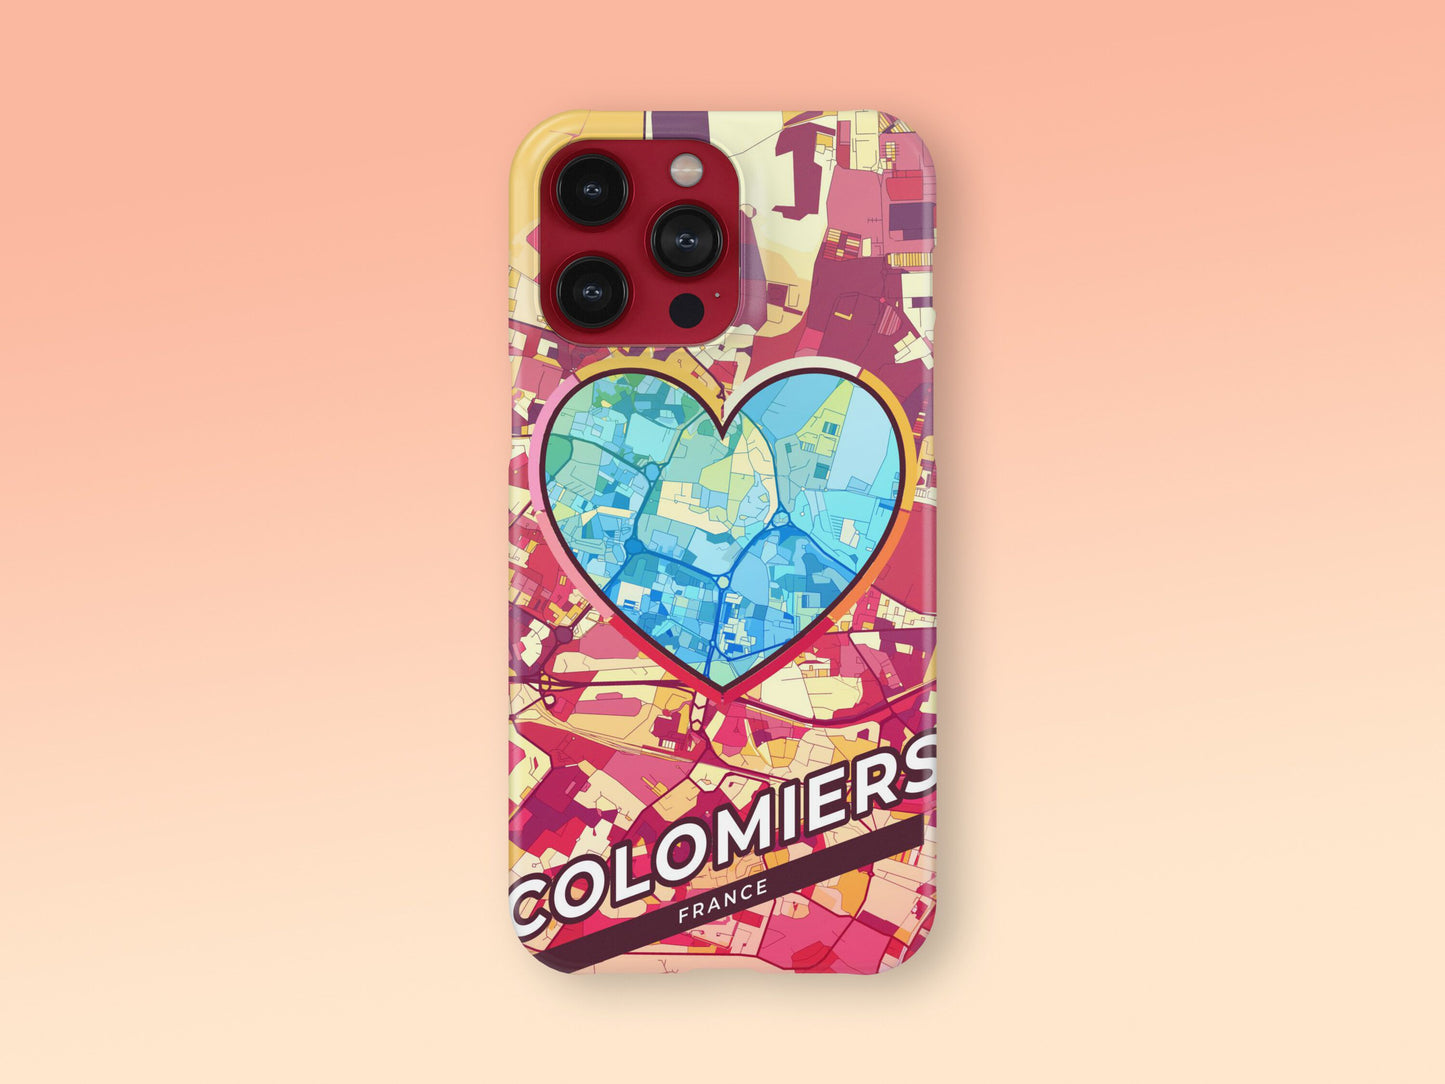 Colomiers France slim phone case with colorful icon. Birthday, wedding or housewarming gift. Couple match cases. 2